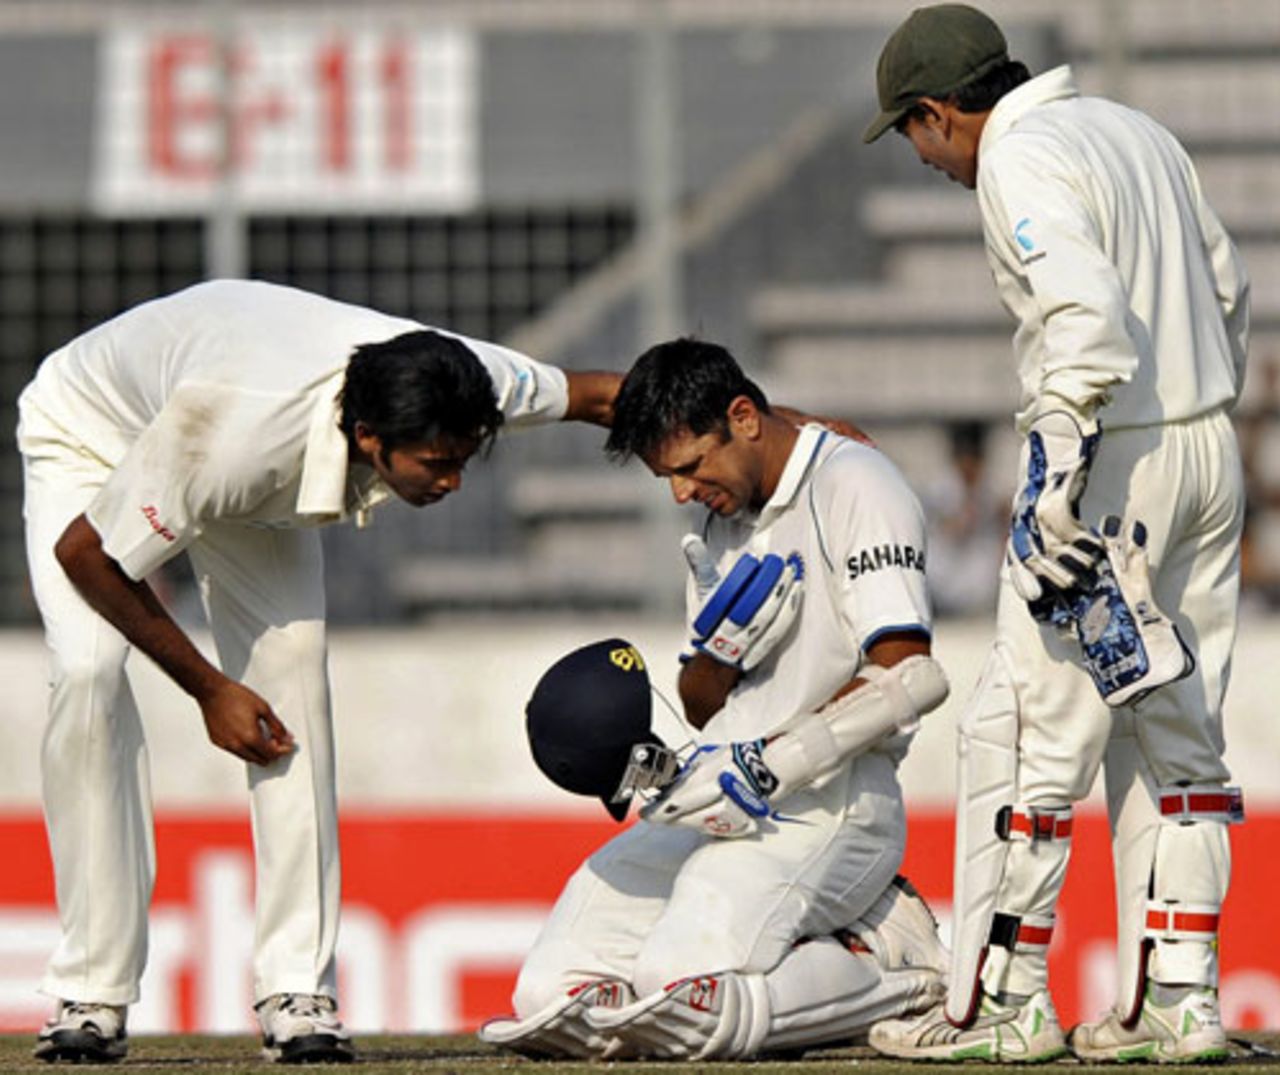 Rahul Dravid is in serious pain after being hit, as the bowler Shahadat Hossain and keeper Mushfiqur Rahim look on, Bangladesh v India, 2nd Test, Mirpur, 2nd day, January 25, 2010